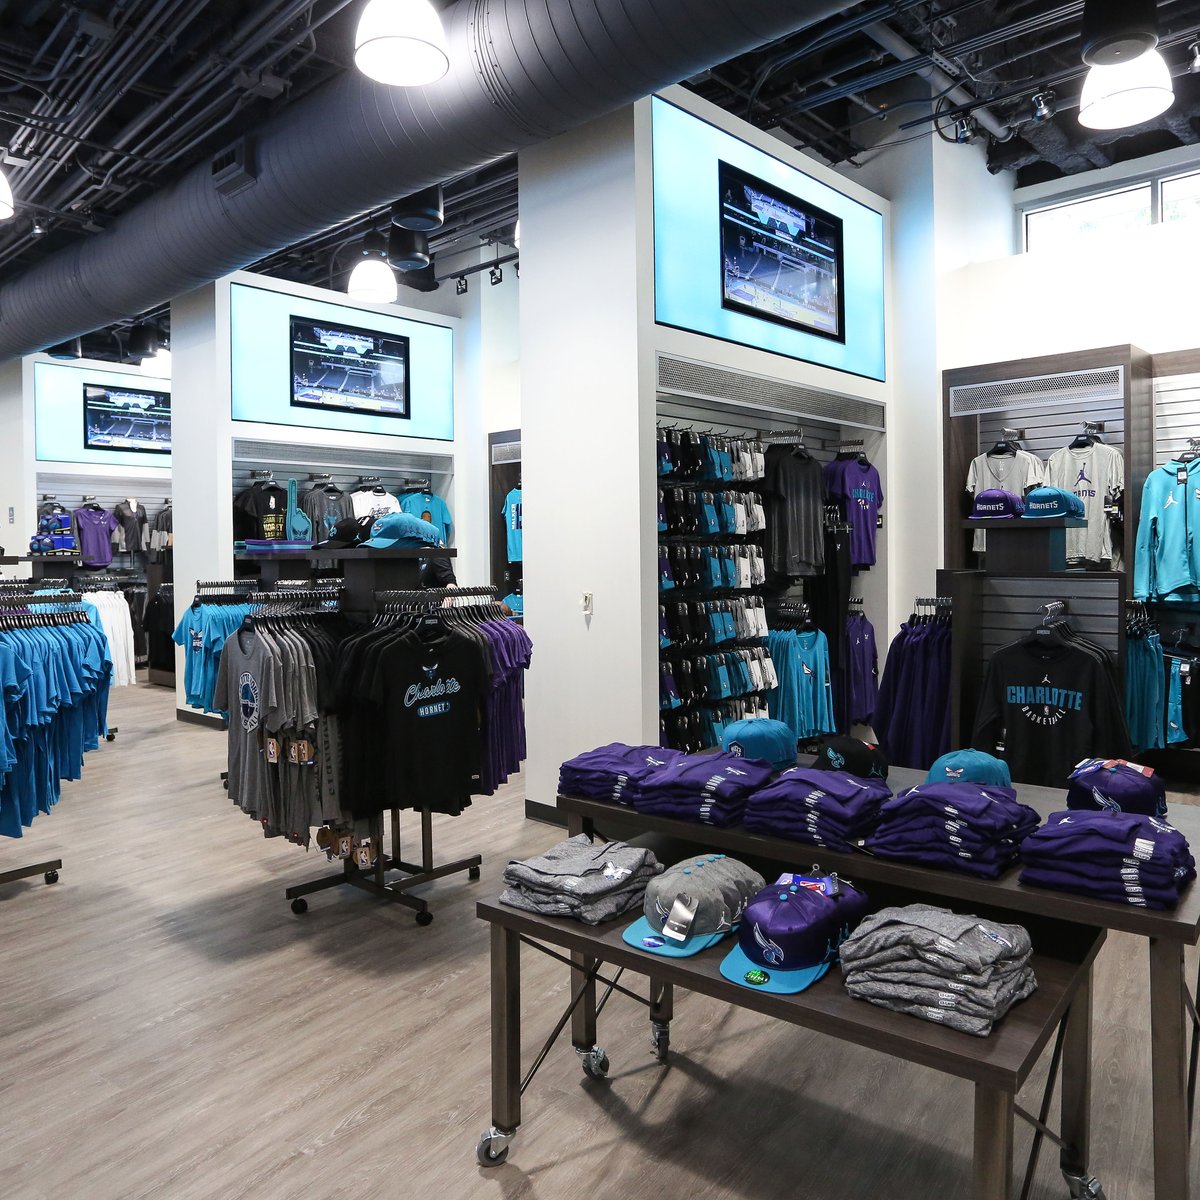 We've officially cut the ribbon on the brand-new Hornets Fan Shop